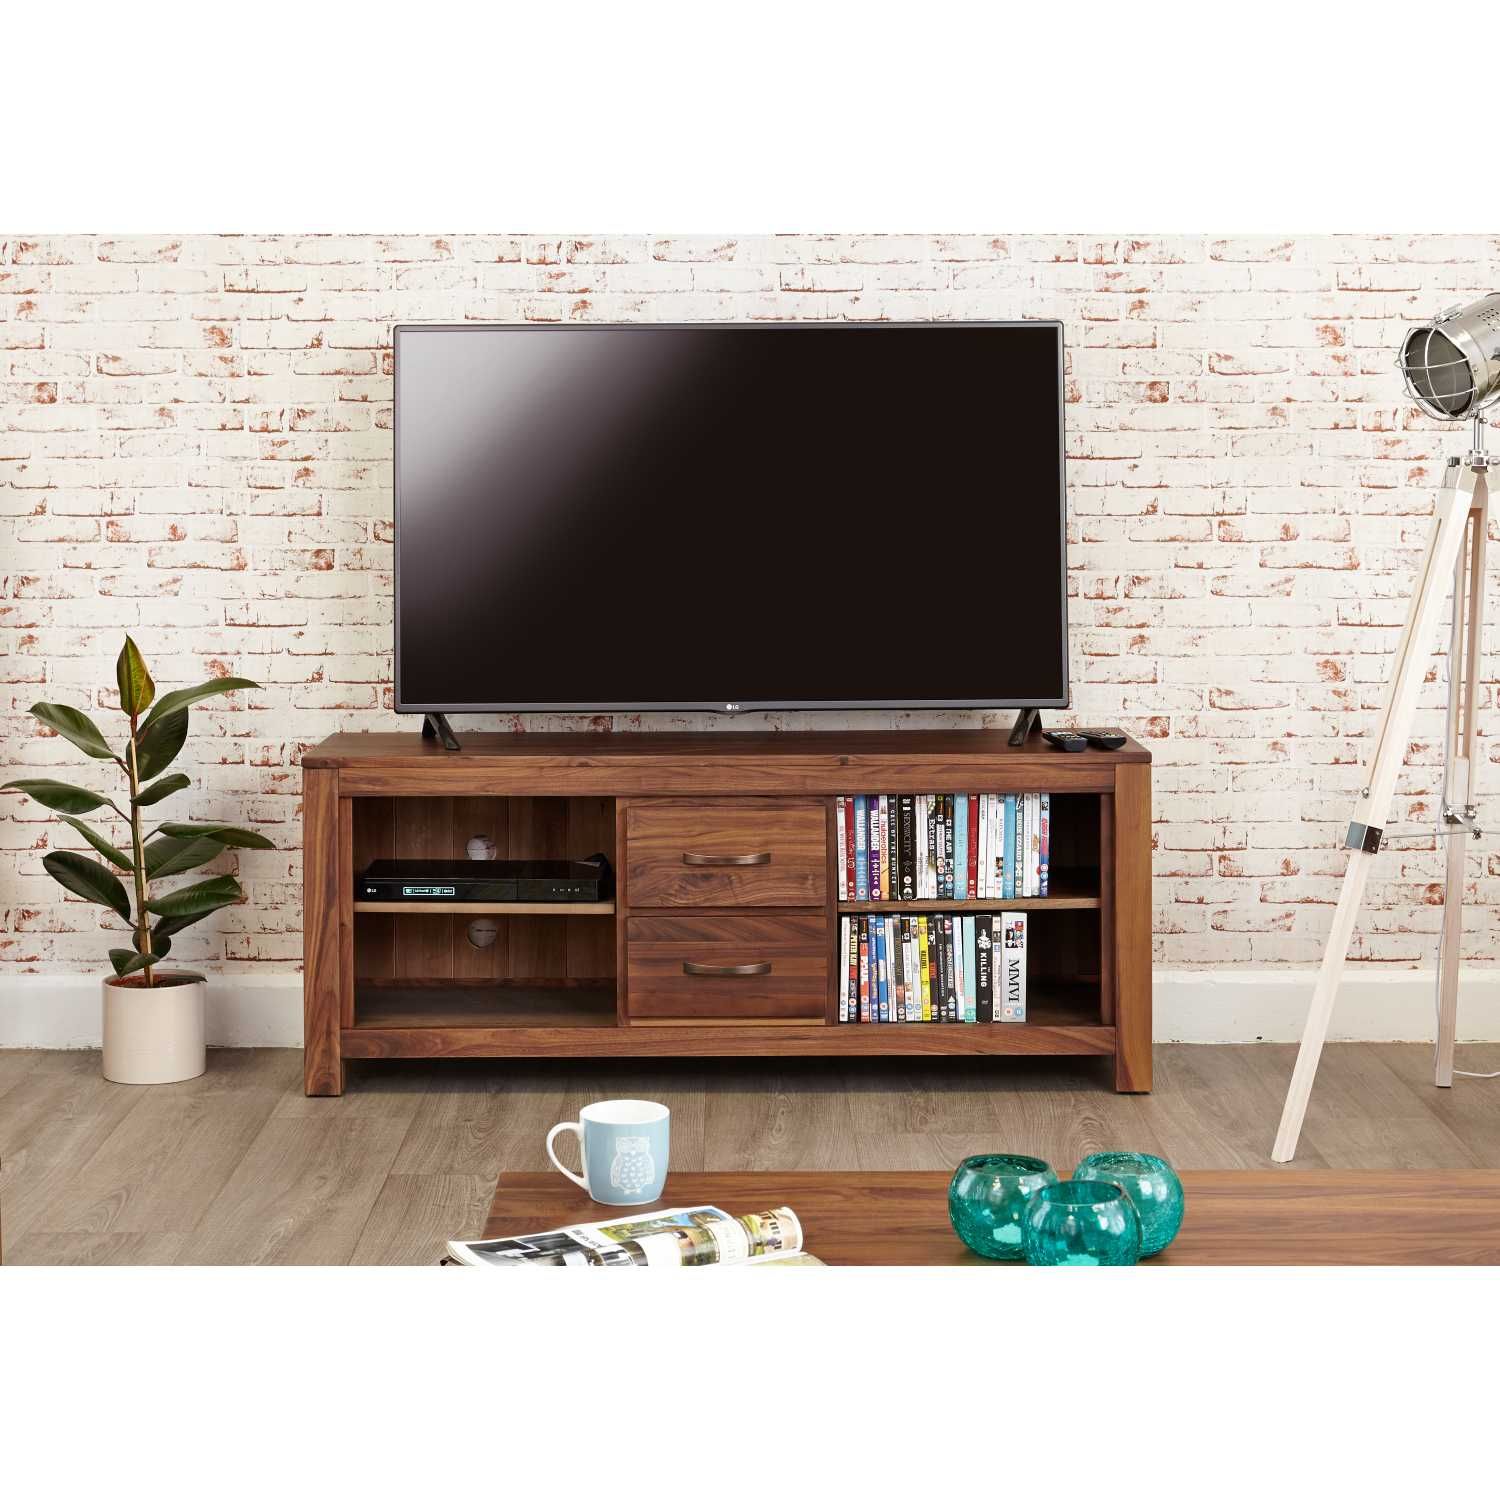 Solid Walnut Widescreen Television Cabinet Tv Media Unit Pertaining To Tv Stands With 2 Open Shelves 2 Drawers High Gloss Tv Unis (View 9 of 15)